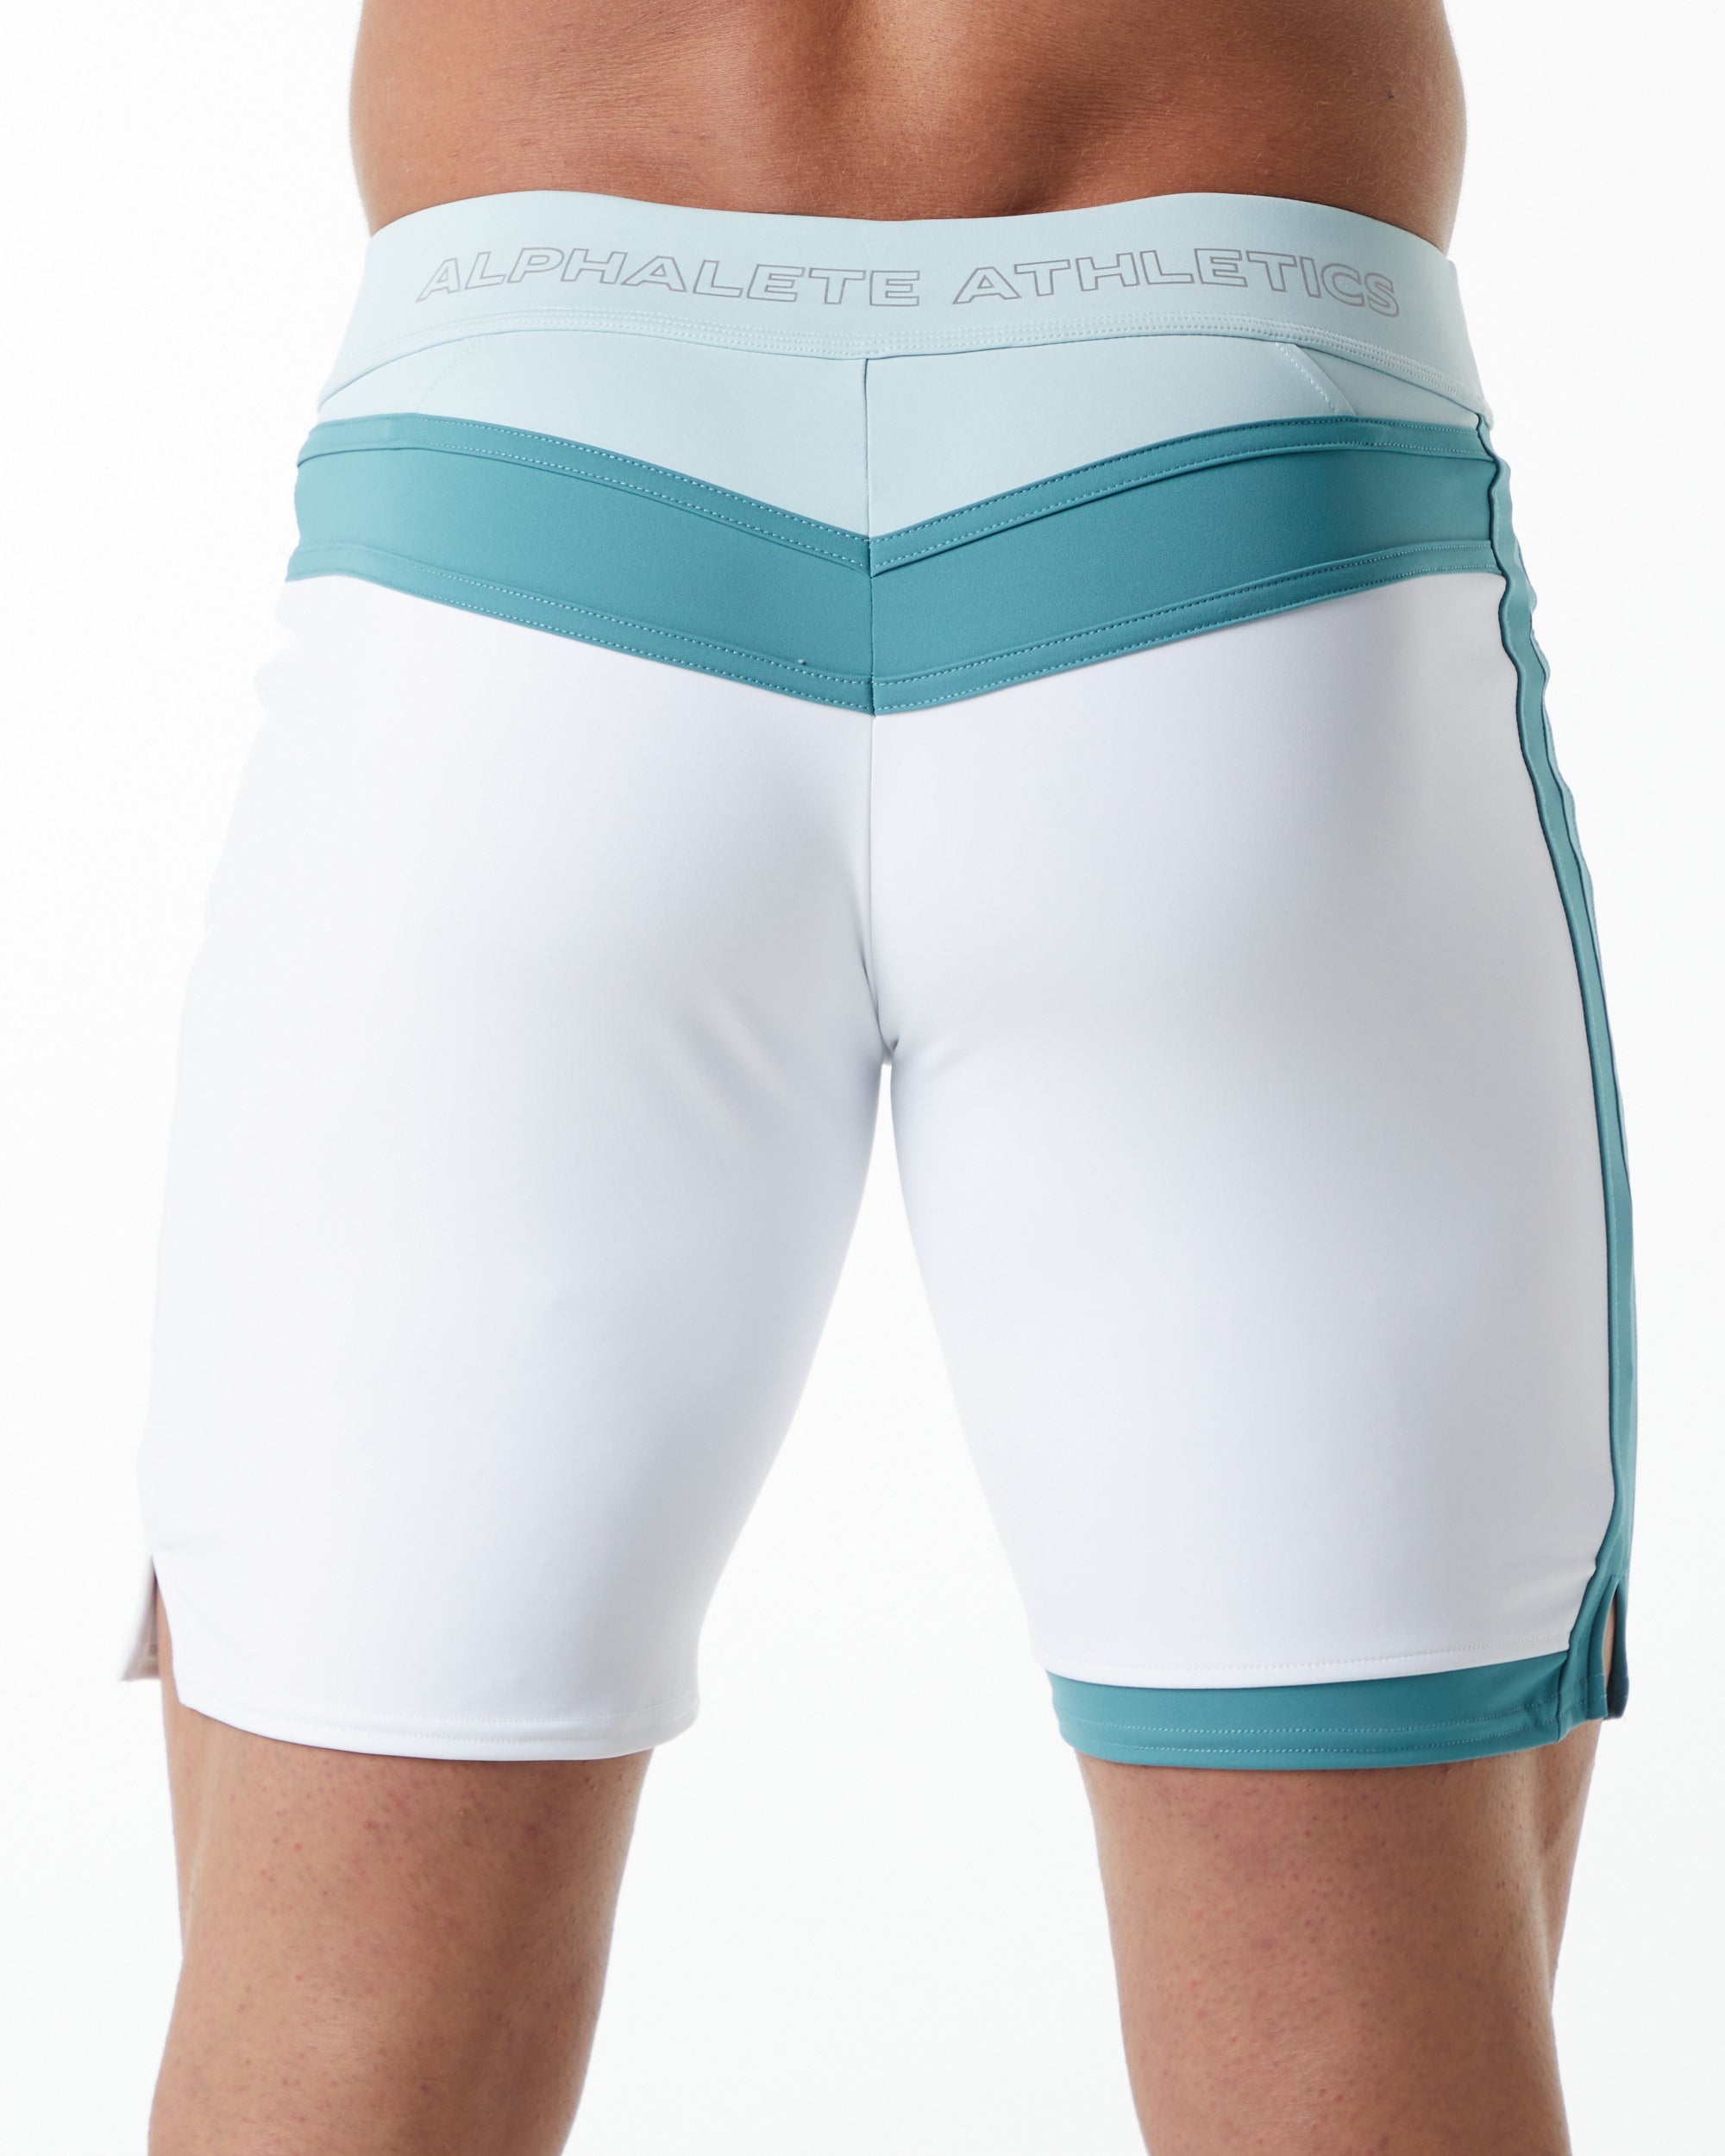 Trident Competition Short - White